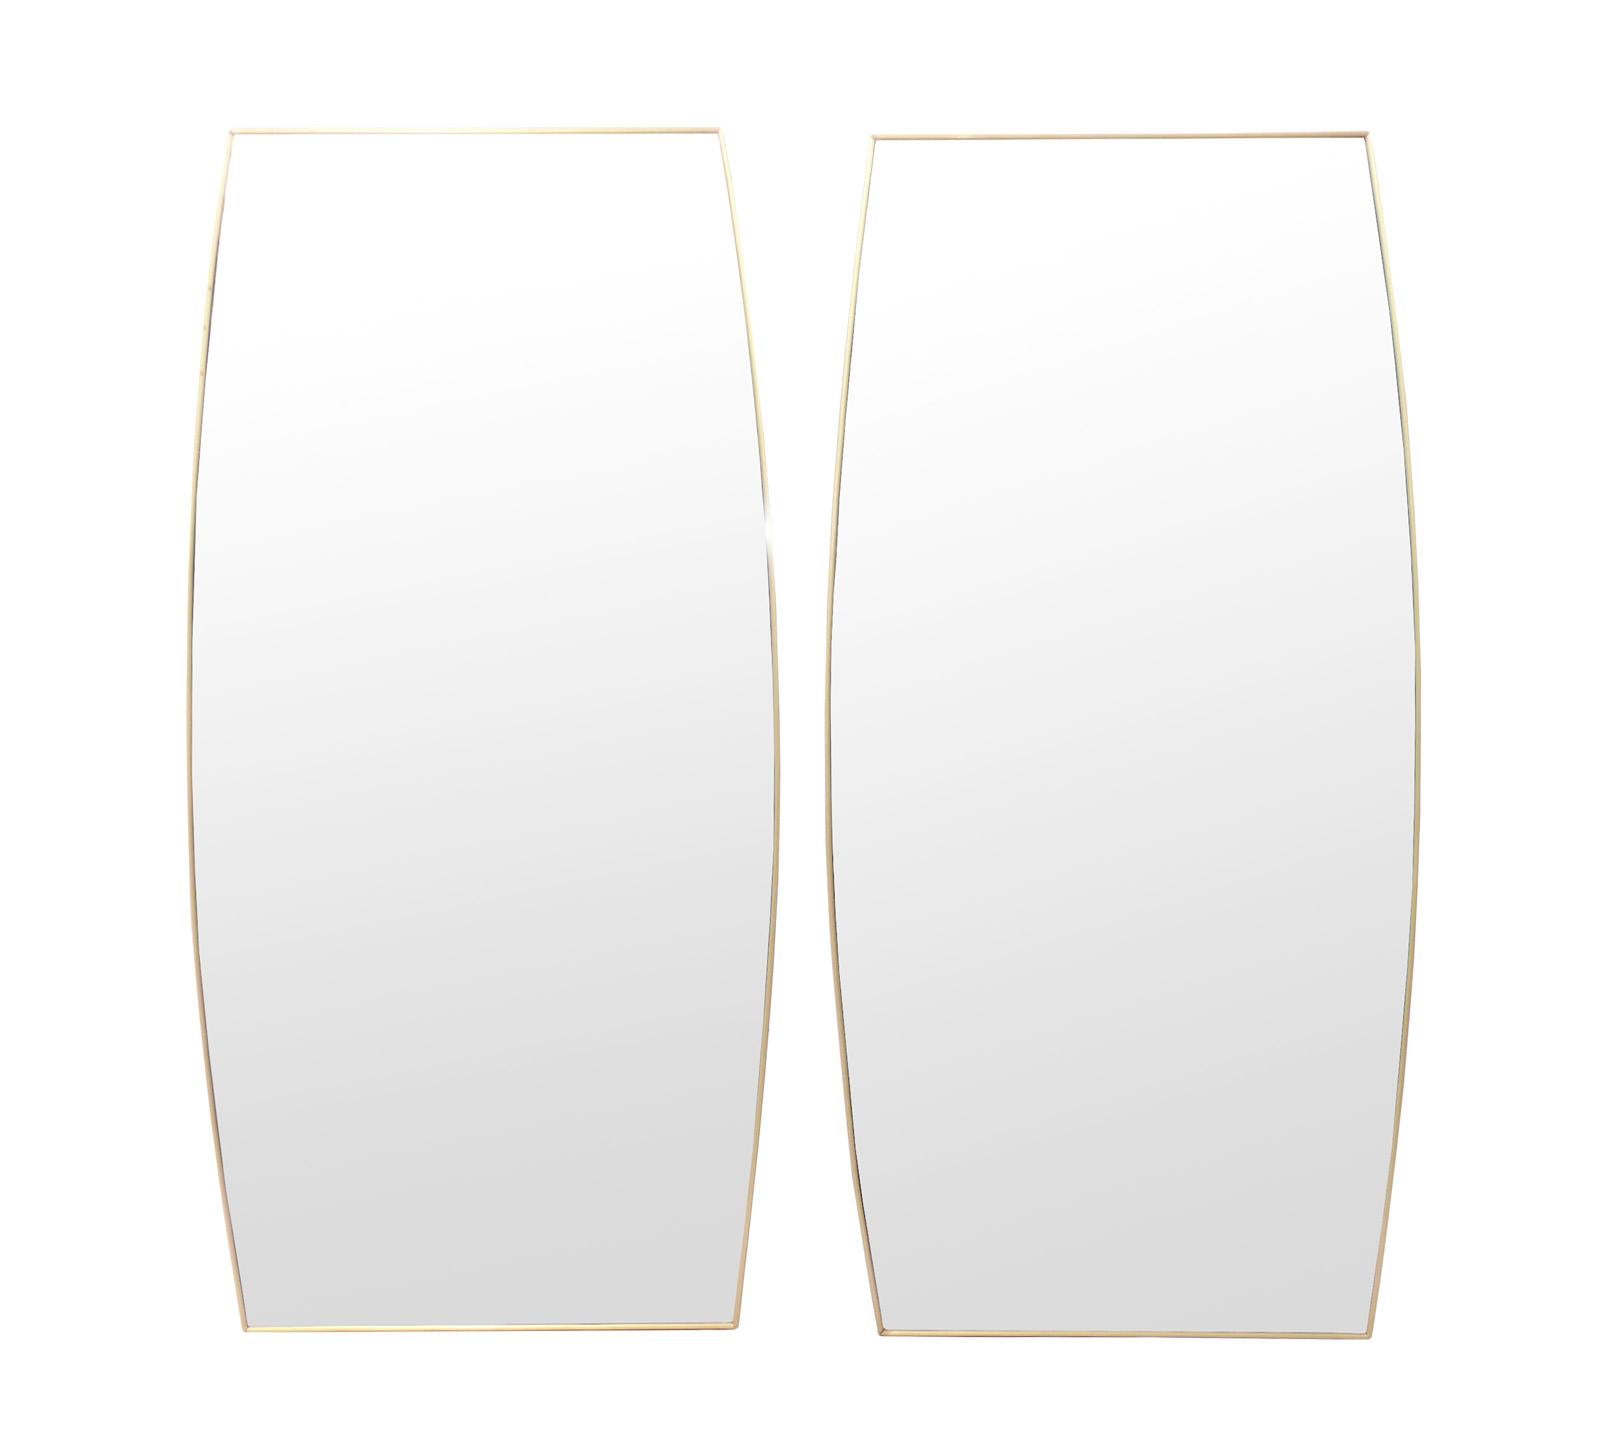 Pair of Brass Tone Cushion Cut Modernist Mirrors, American, circa 1960s. They are priced at $850 each or $1500 for the pair. They are believed to be constructed of brass toned anodized aluminum frames with cushion cut mirrors. 